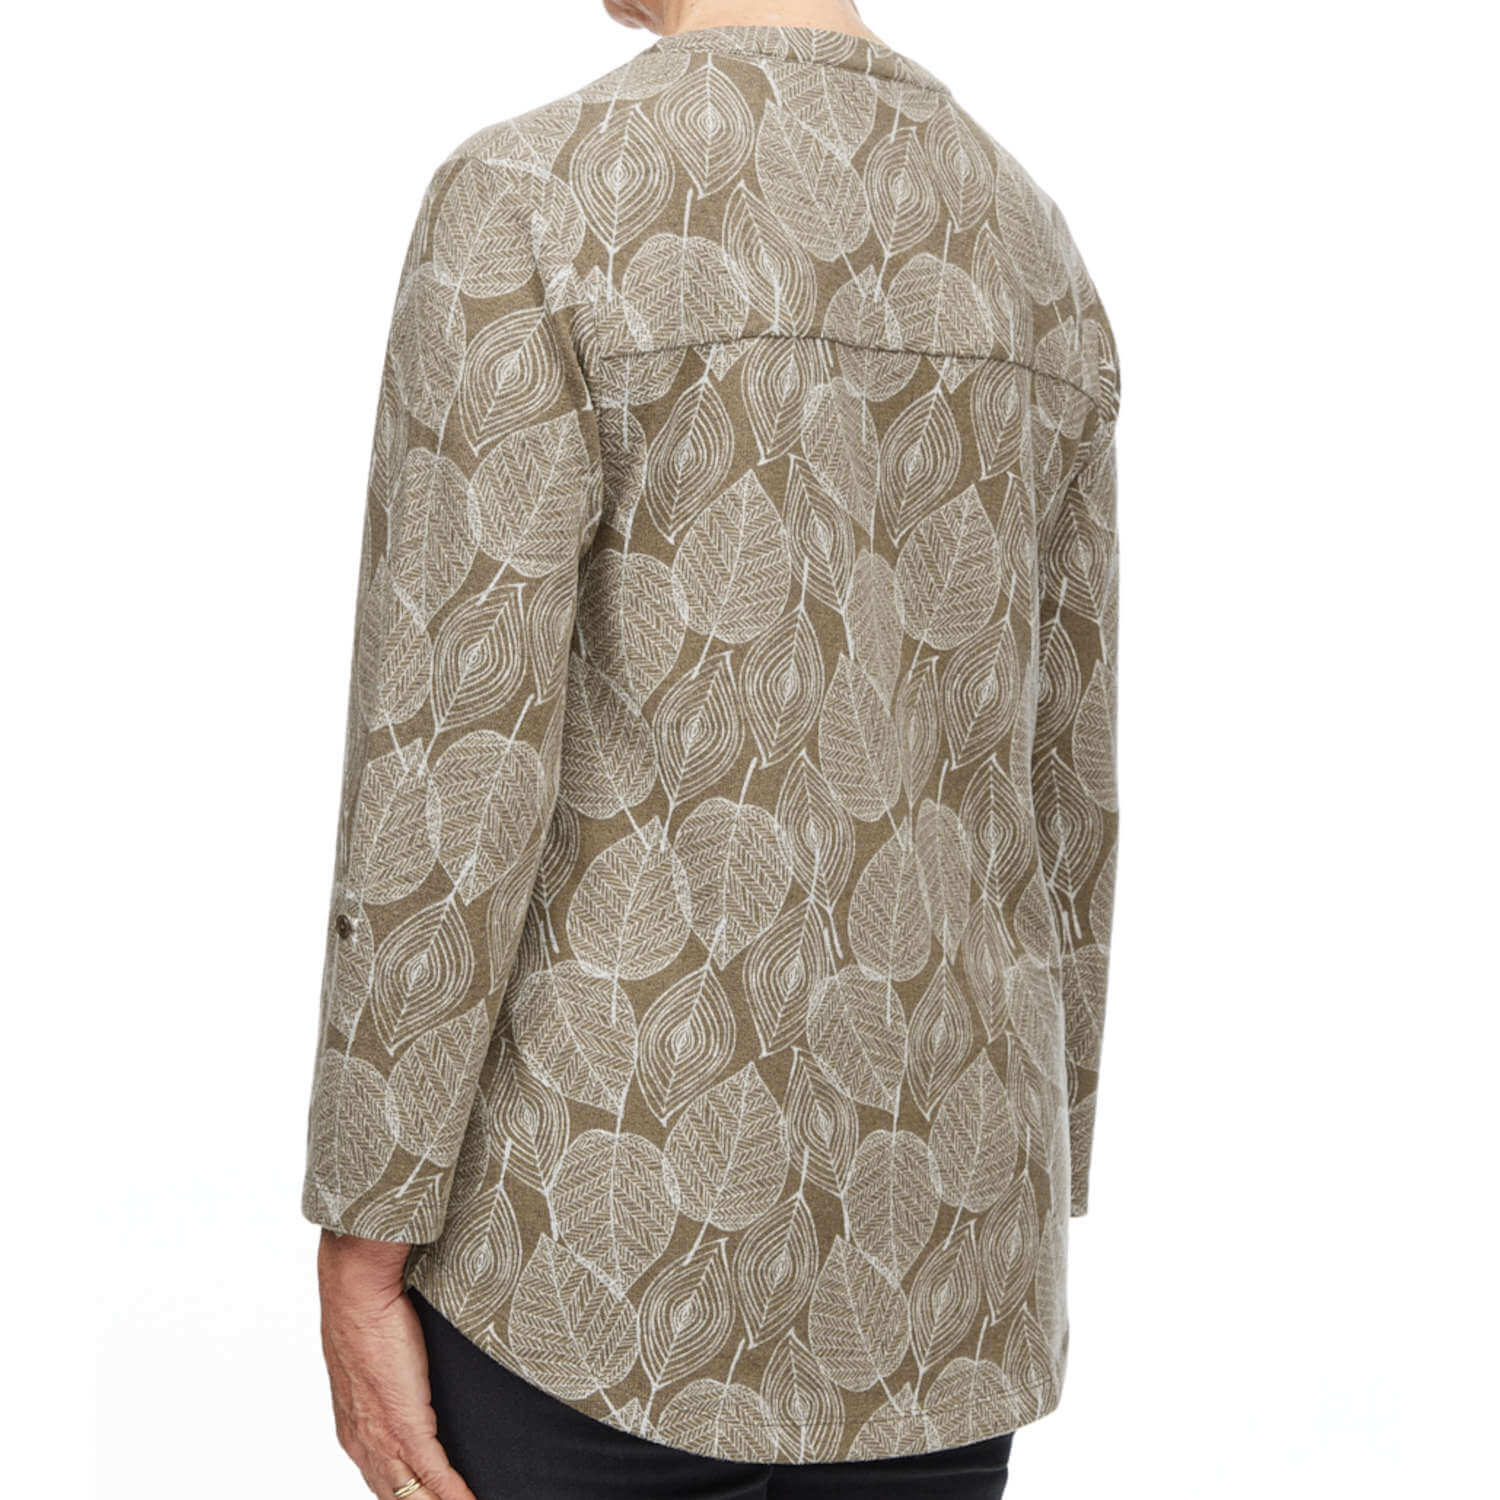 Tigiwear Stencil Leaf Print Top - Taupe 3 Shaws Department Stores